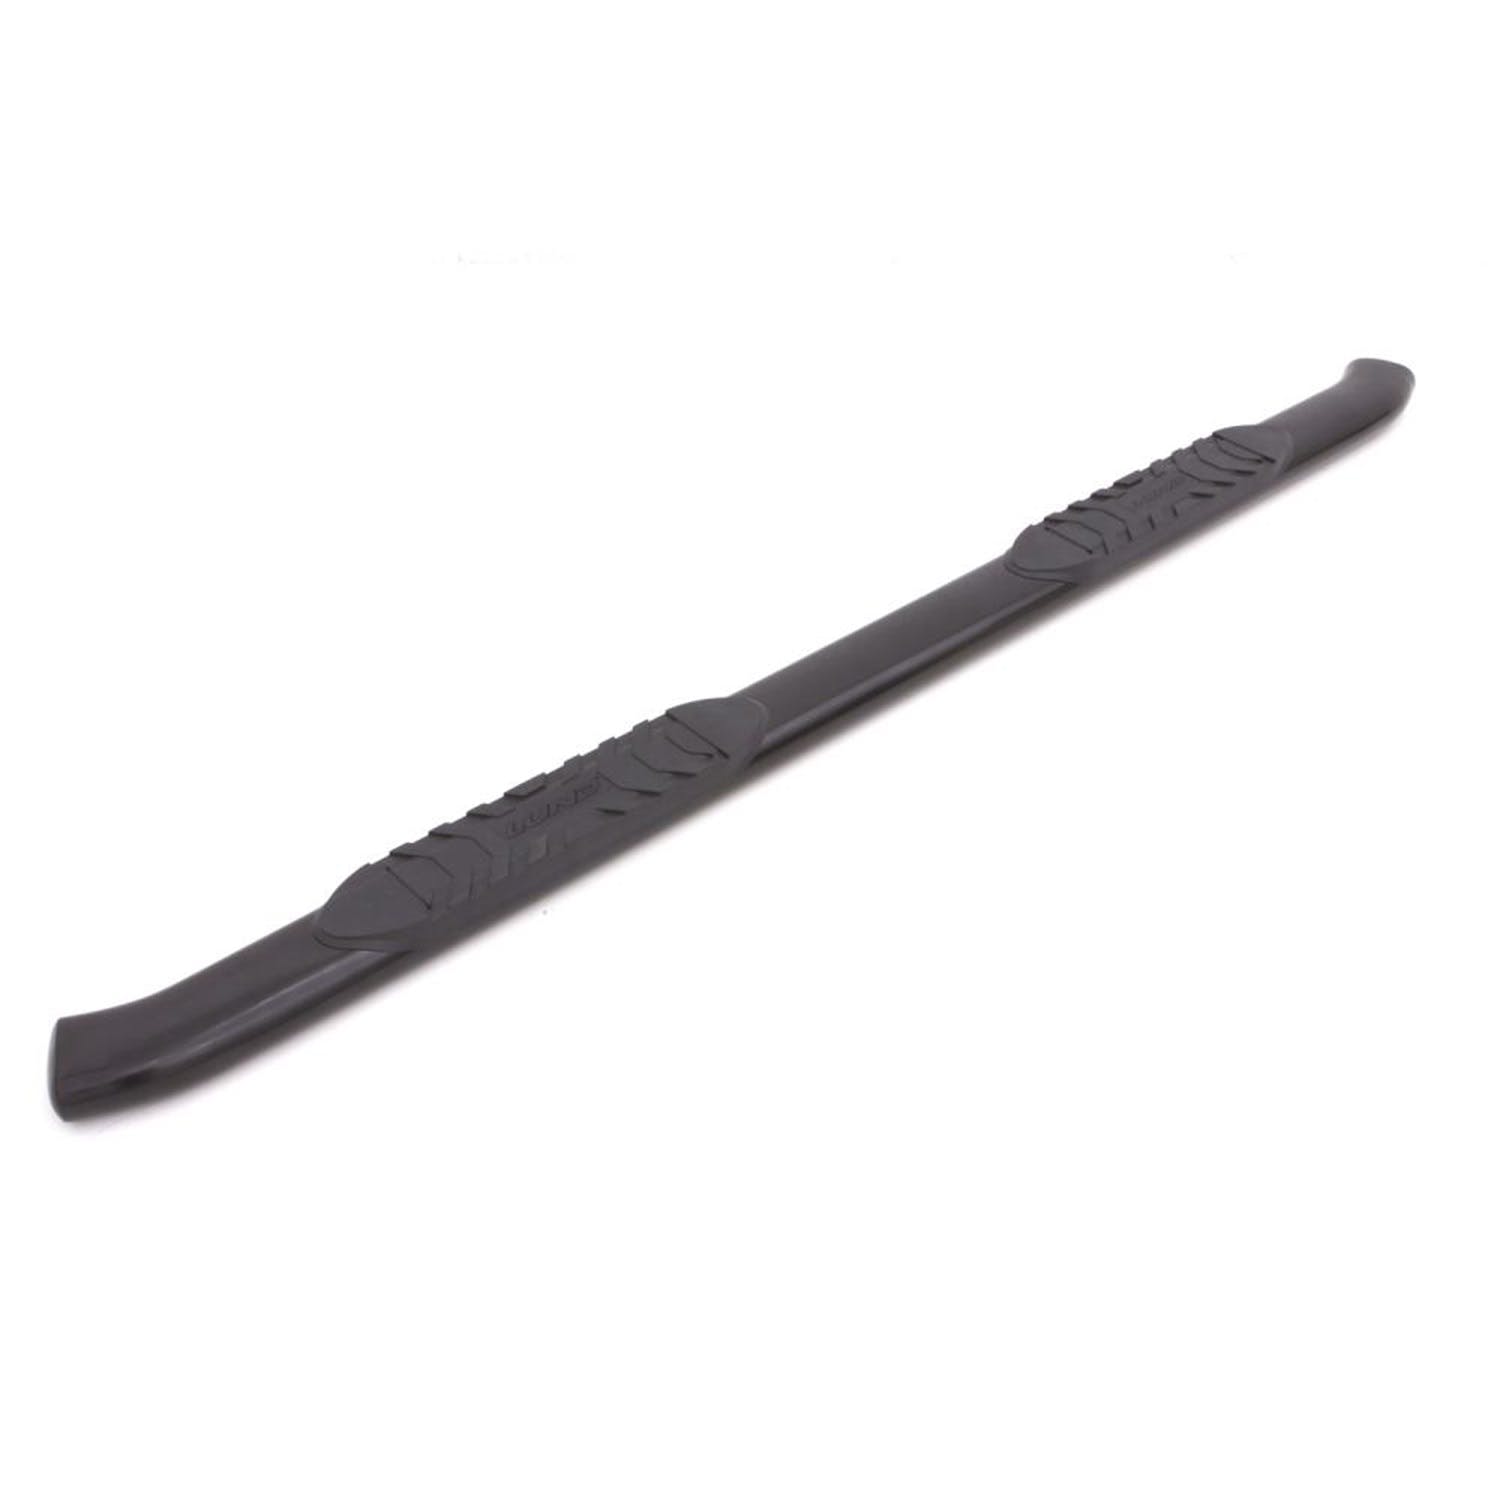 LUND 24286008 5 Inch Oval Curved Nerf Bar - Black LUND -5 inch CURVED OVAL BLACK SS